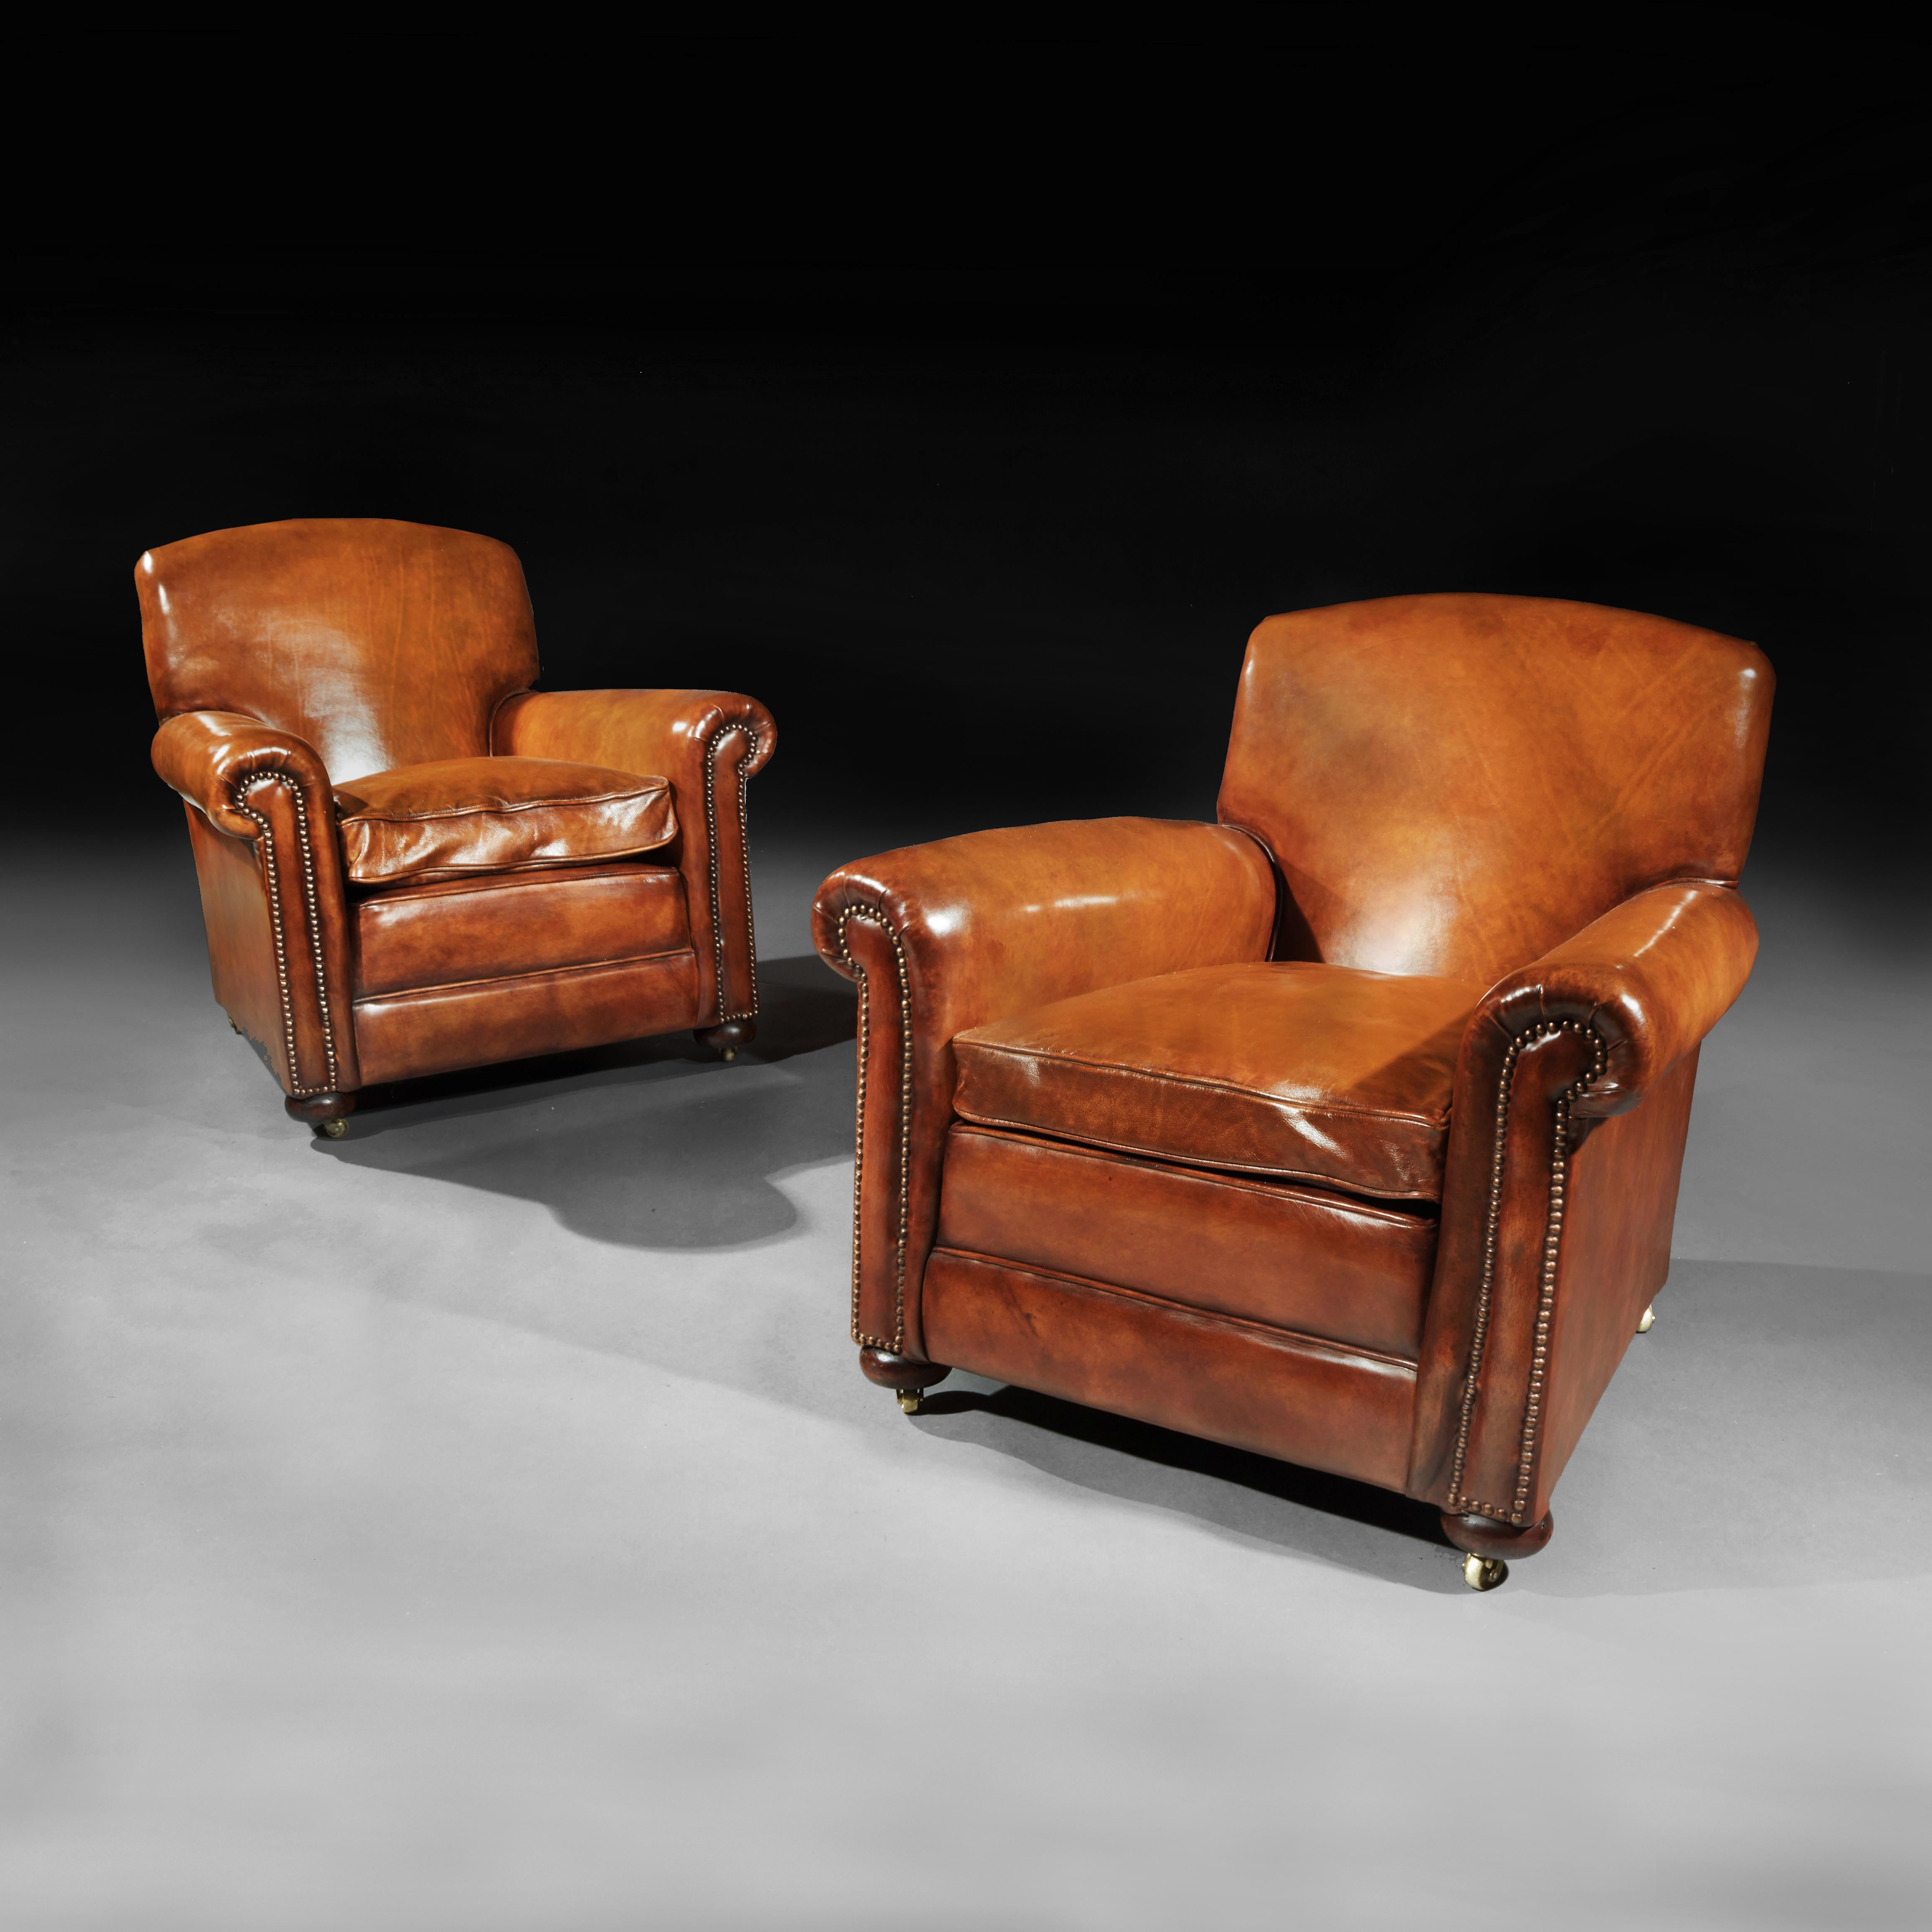 A fine pair of antique leather club chairs raised on turned front bun feet, of very good proportions and extremely comfortable having sprung seat and backs. 

English, circa 1900s

This pair of club chairs date from the early 20th century,